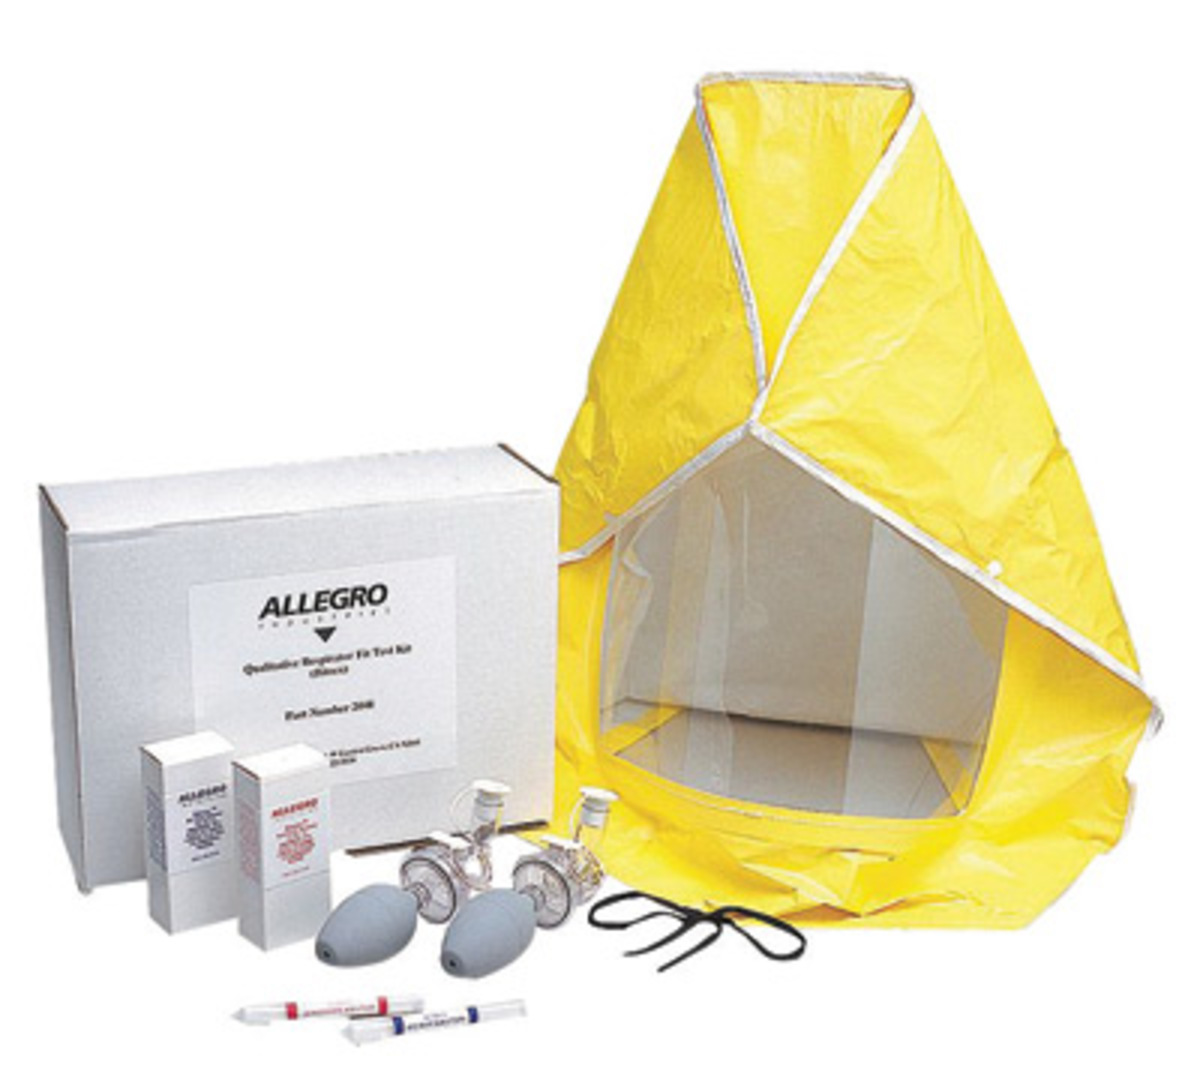 Allegro® Saccharin Fit Test Solution For All Respirators